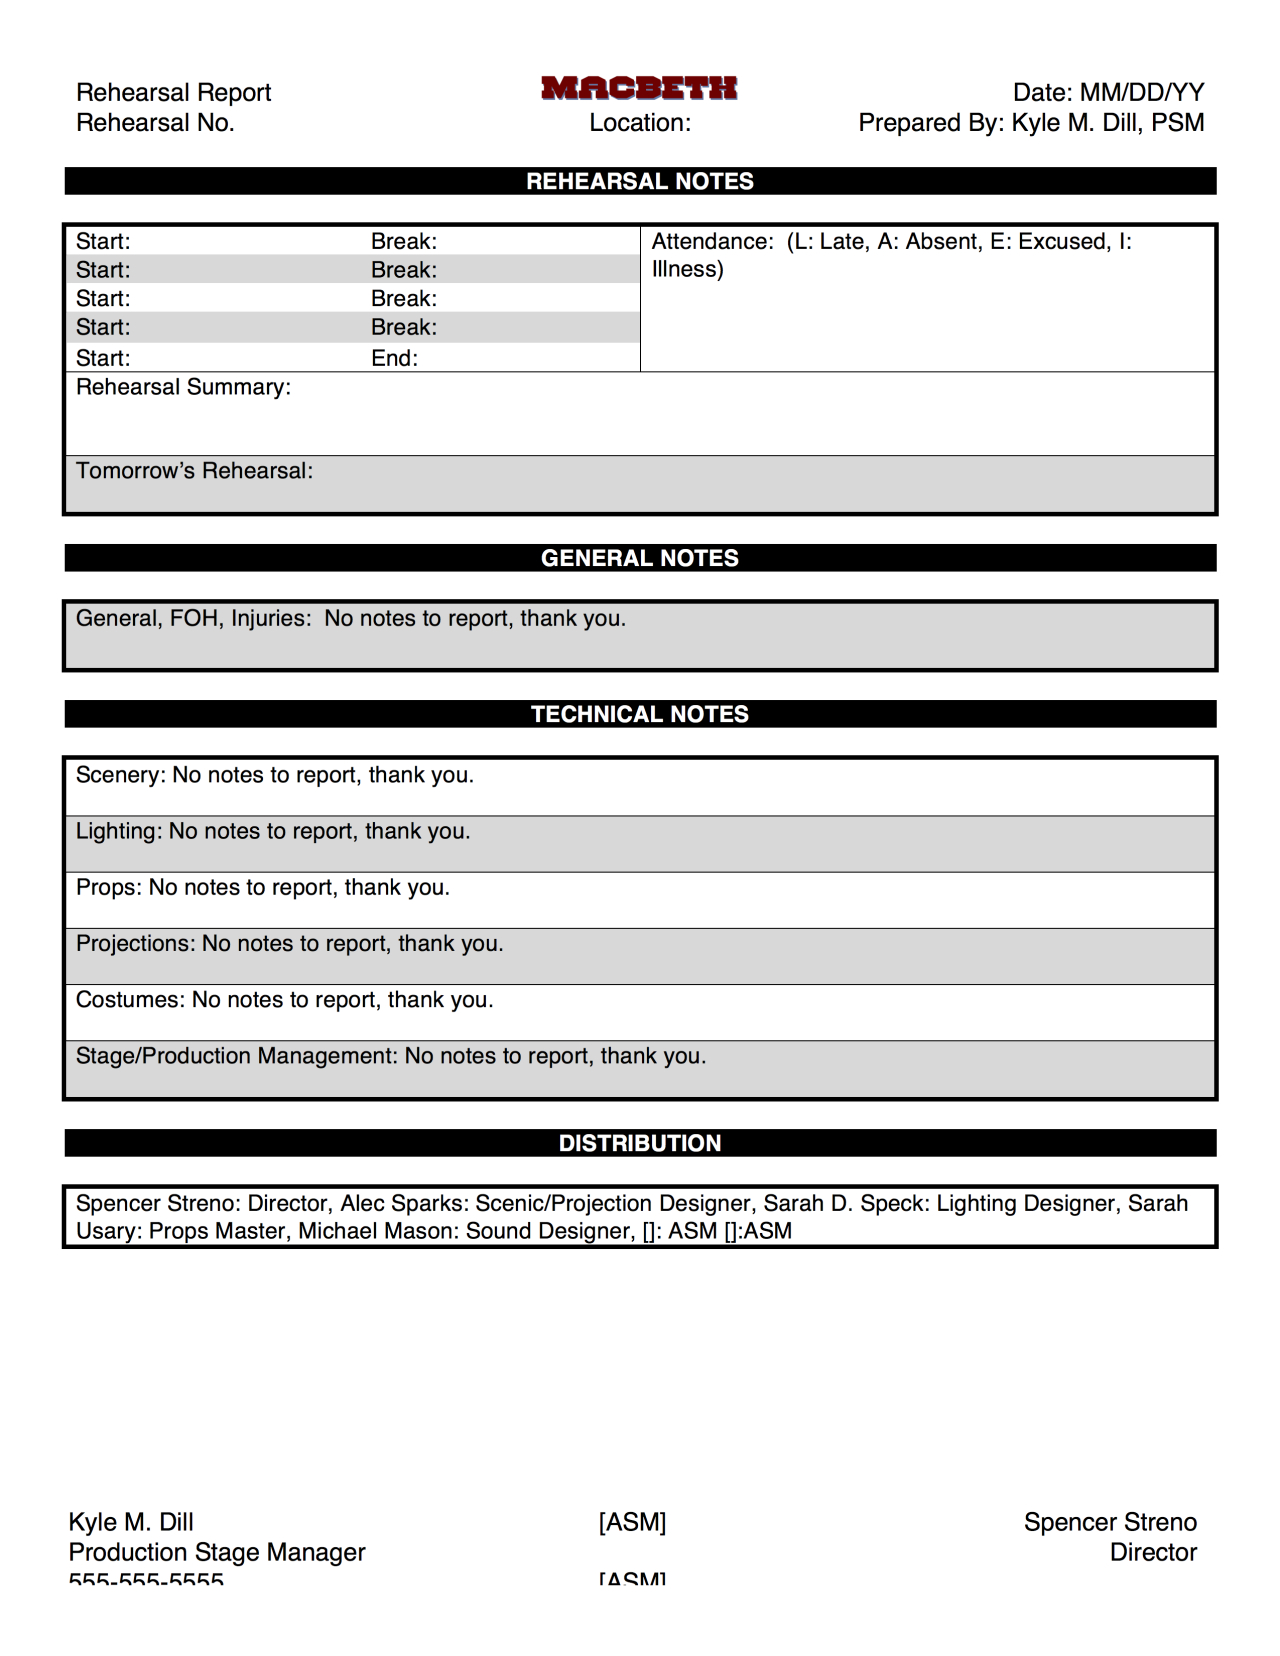 Macbeth@su Production Blog — Here's The Template For Our With Regard To Rehearsal Report Template